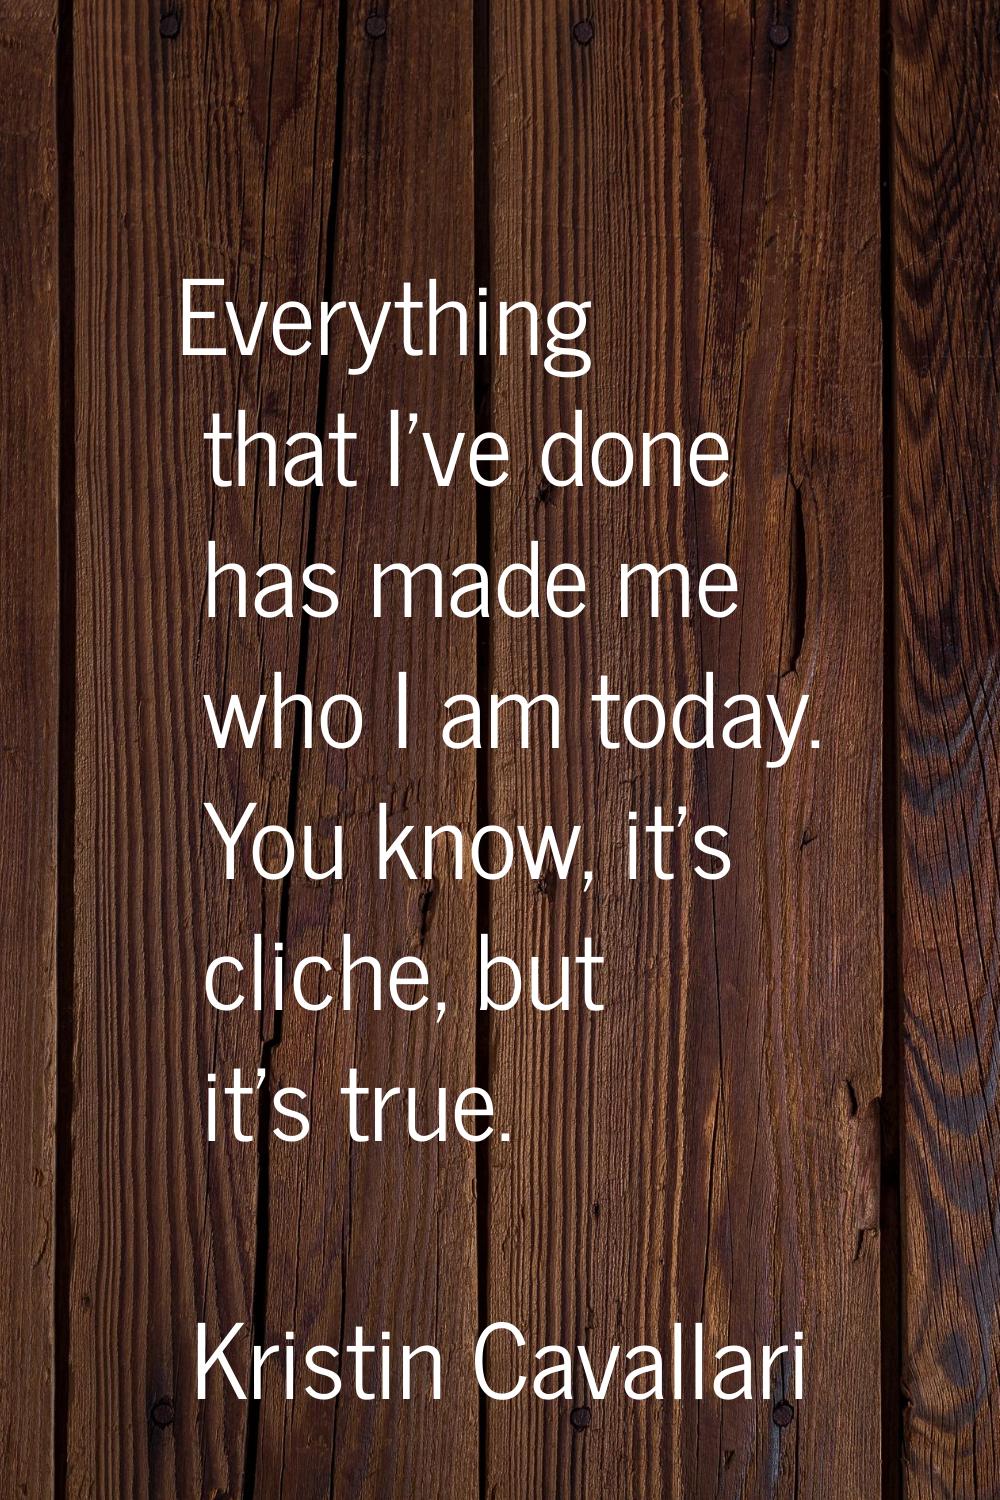 Everything that I've done has made me who I am today. You know, it's cliche, but it's true.